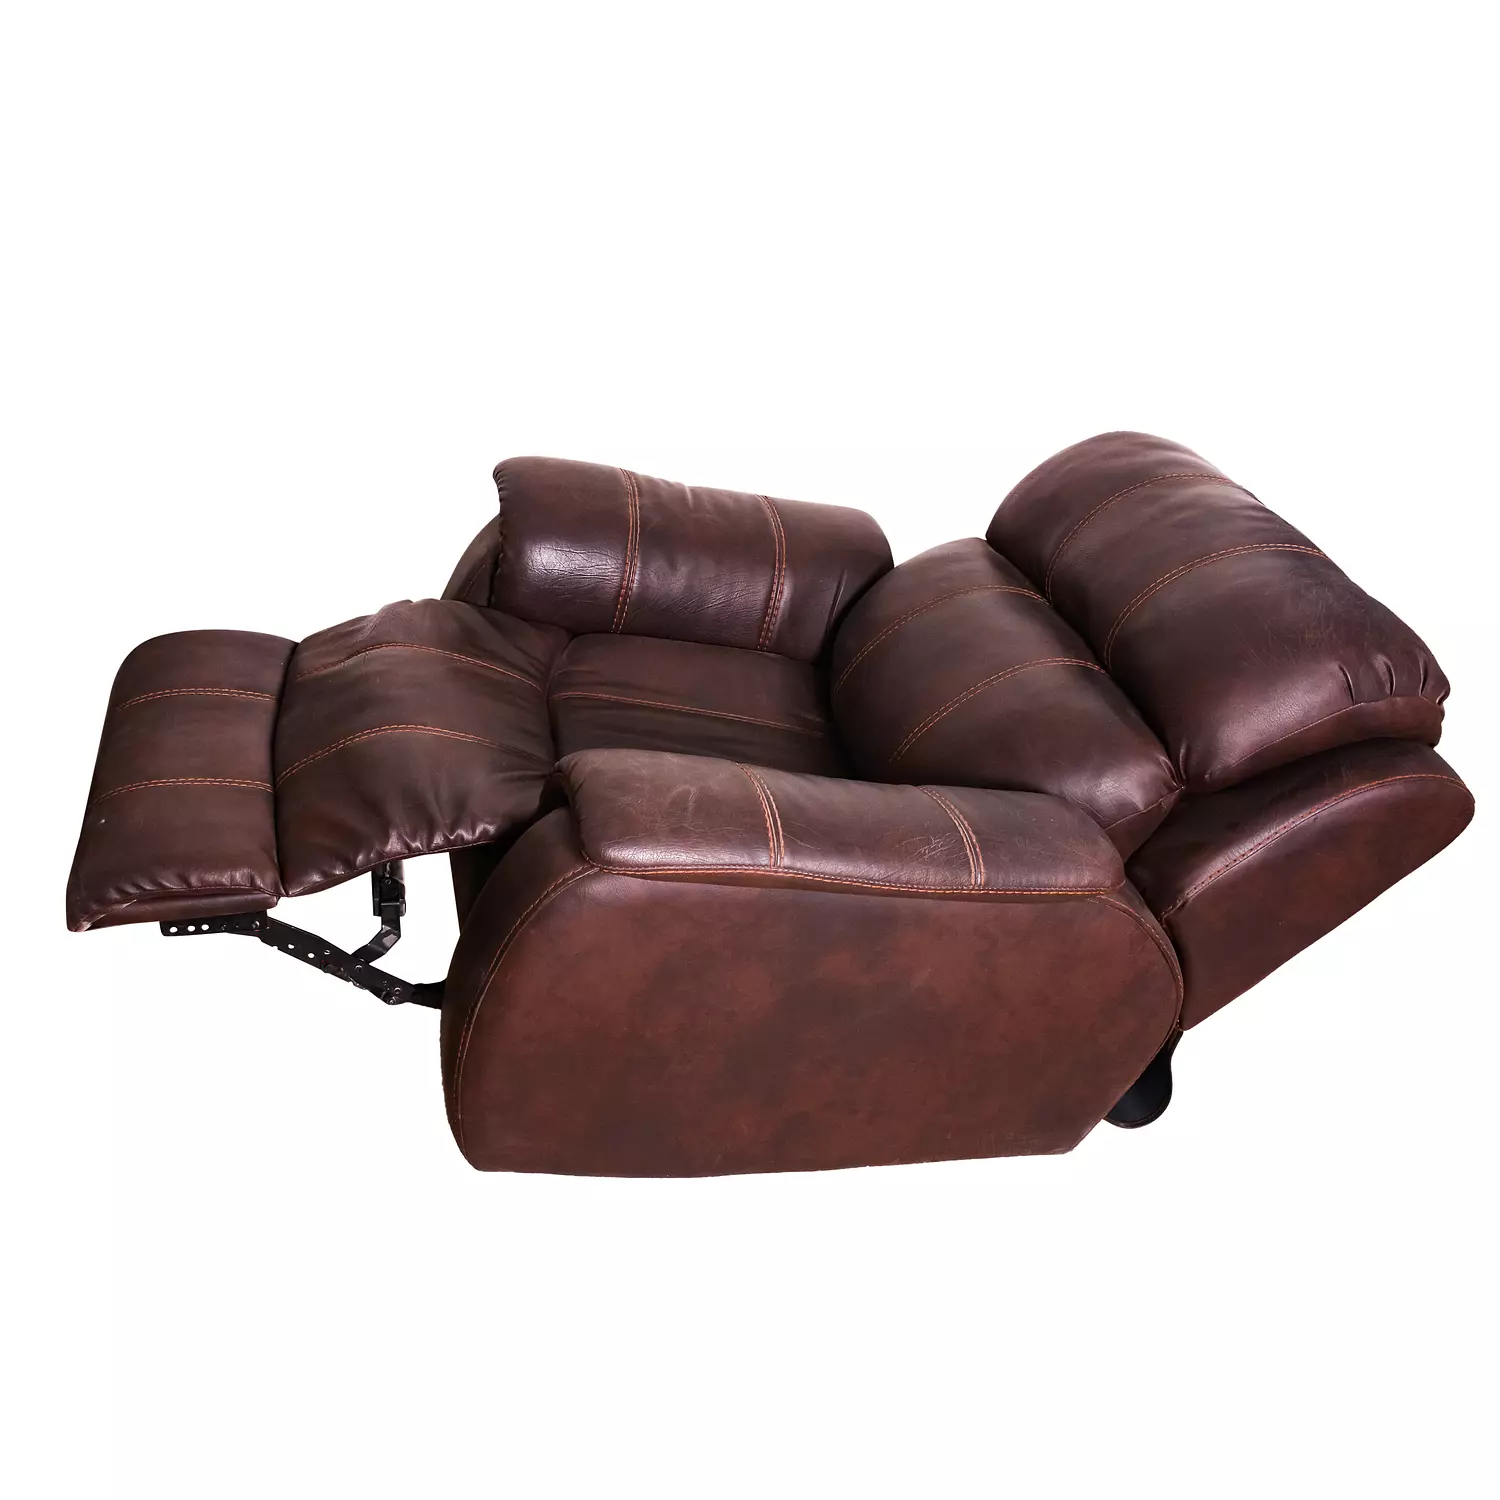 0100-21 Brown leather Lazy Boy chair-2nd-img